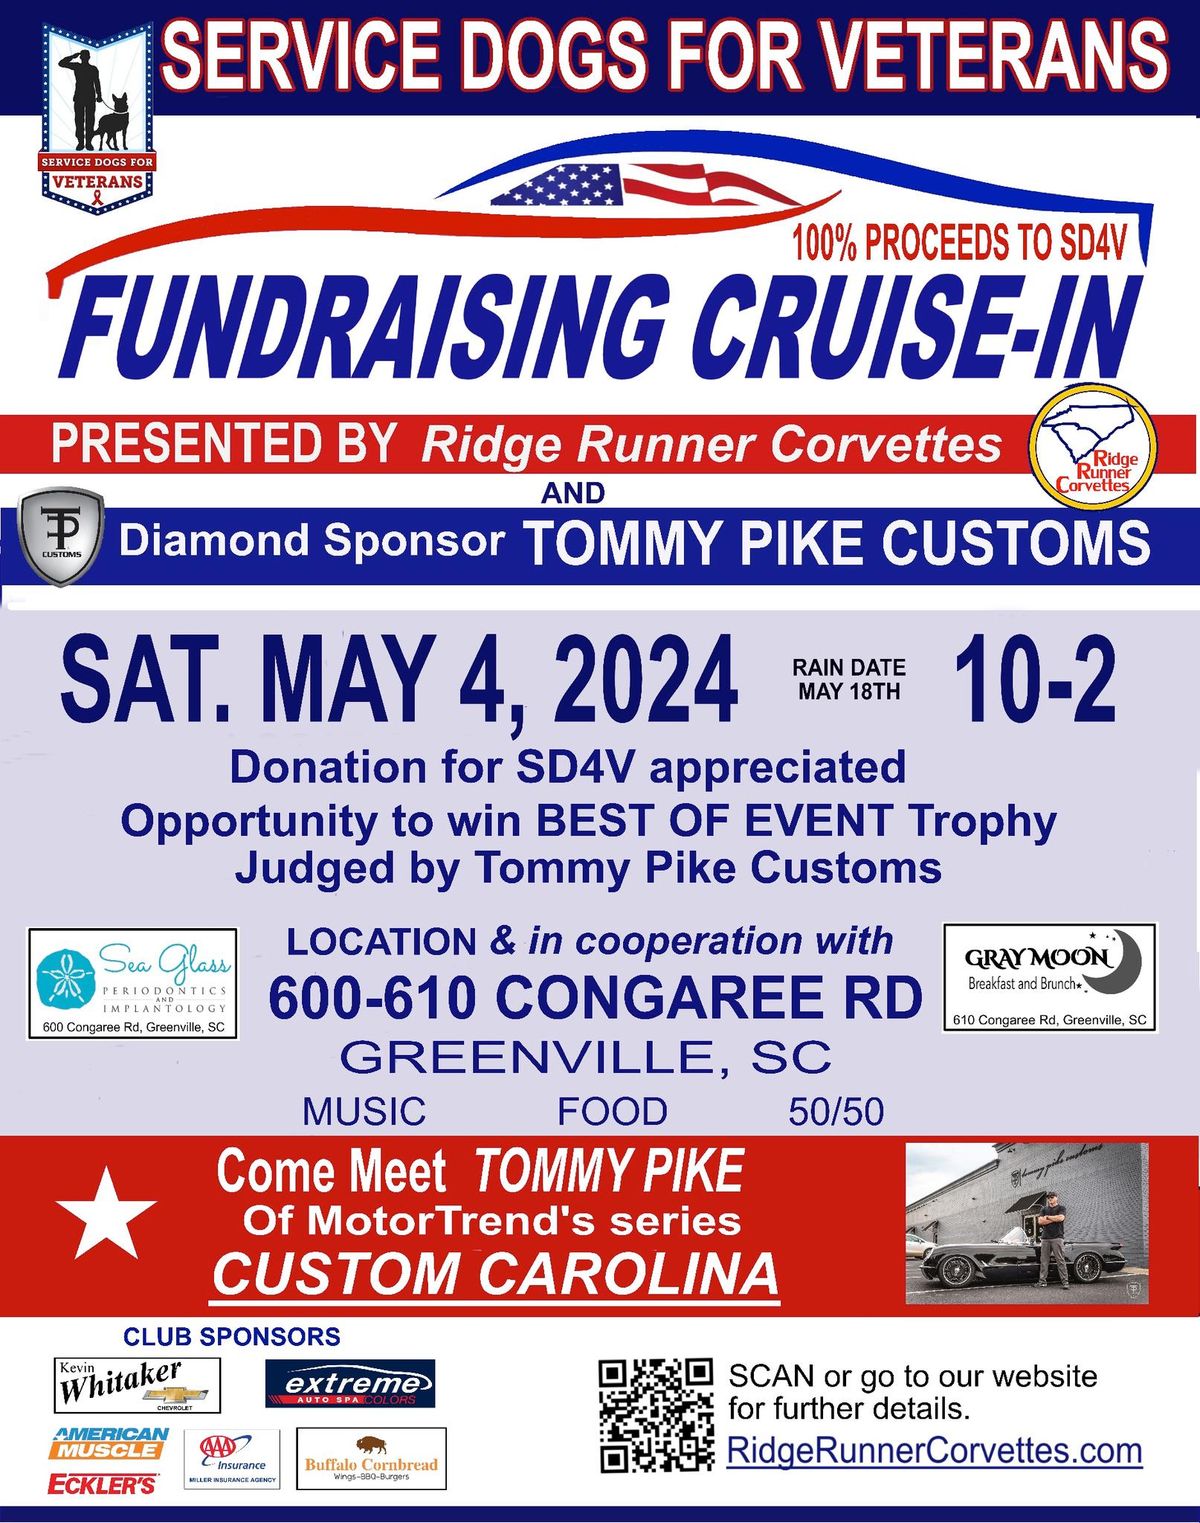 FUNDRAISING CRUISE-IN for SERVICE DOGS FOR VETERANS